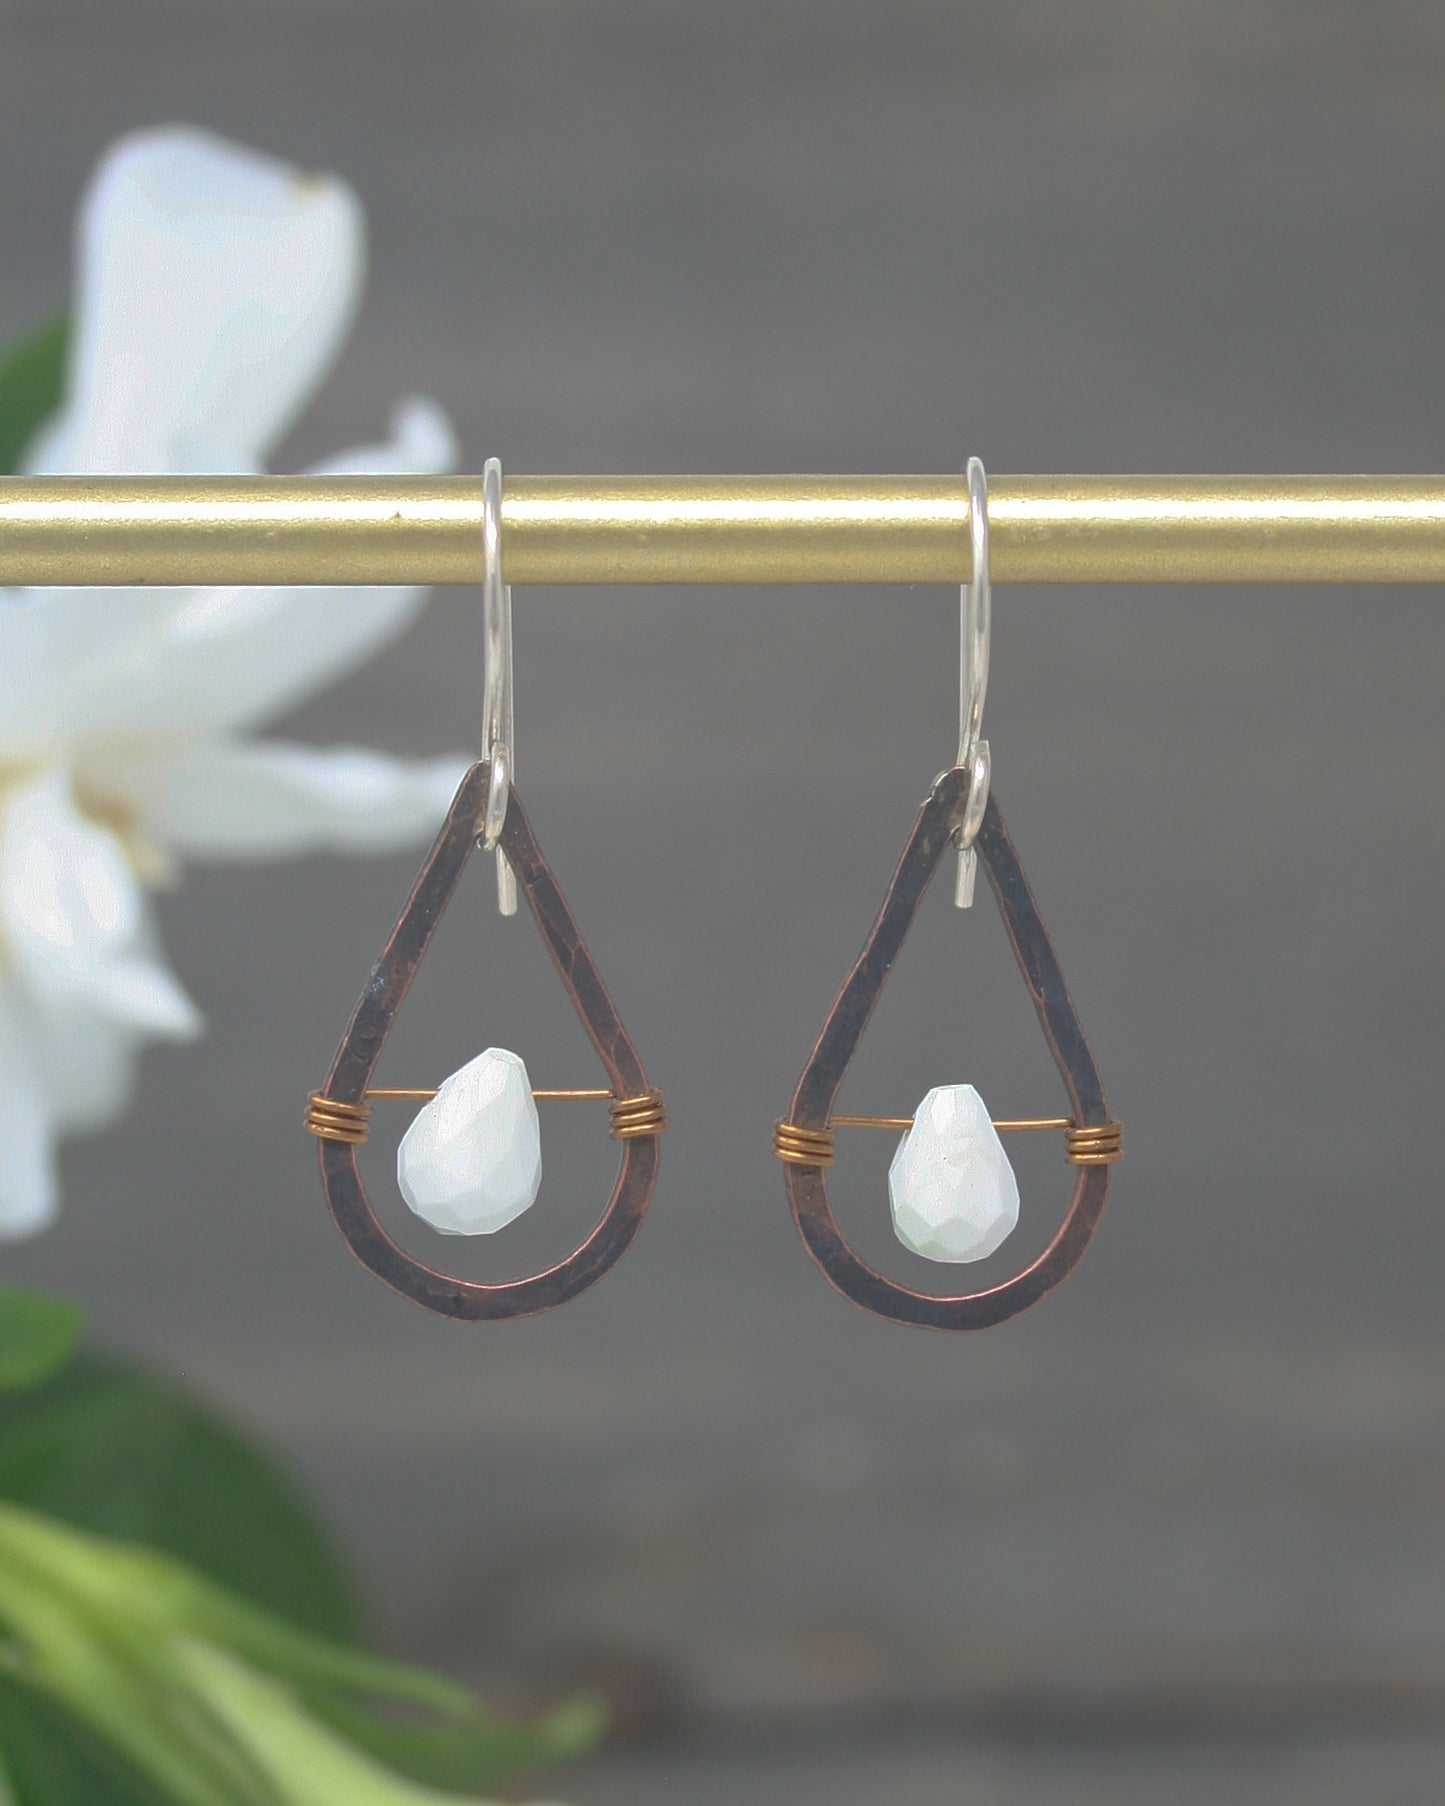 a pair of earrings hanging from a metal bar